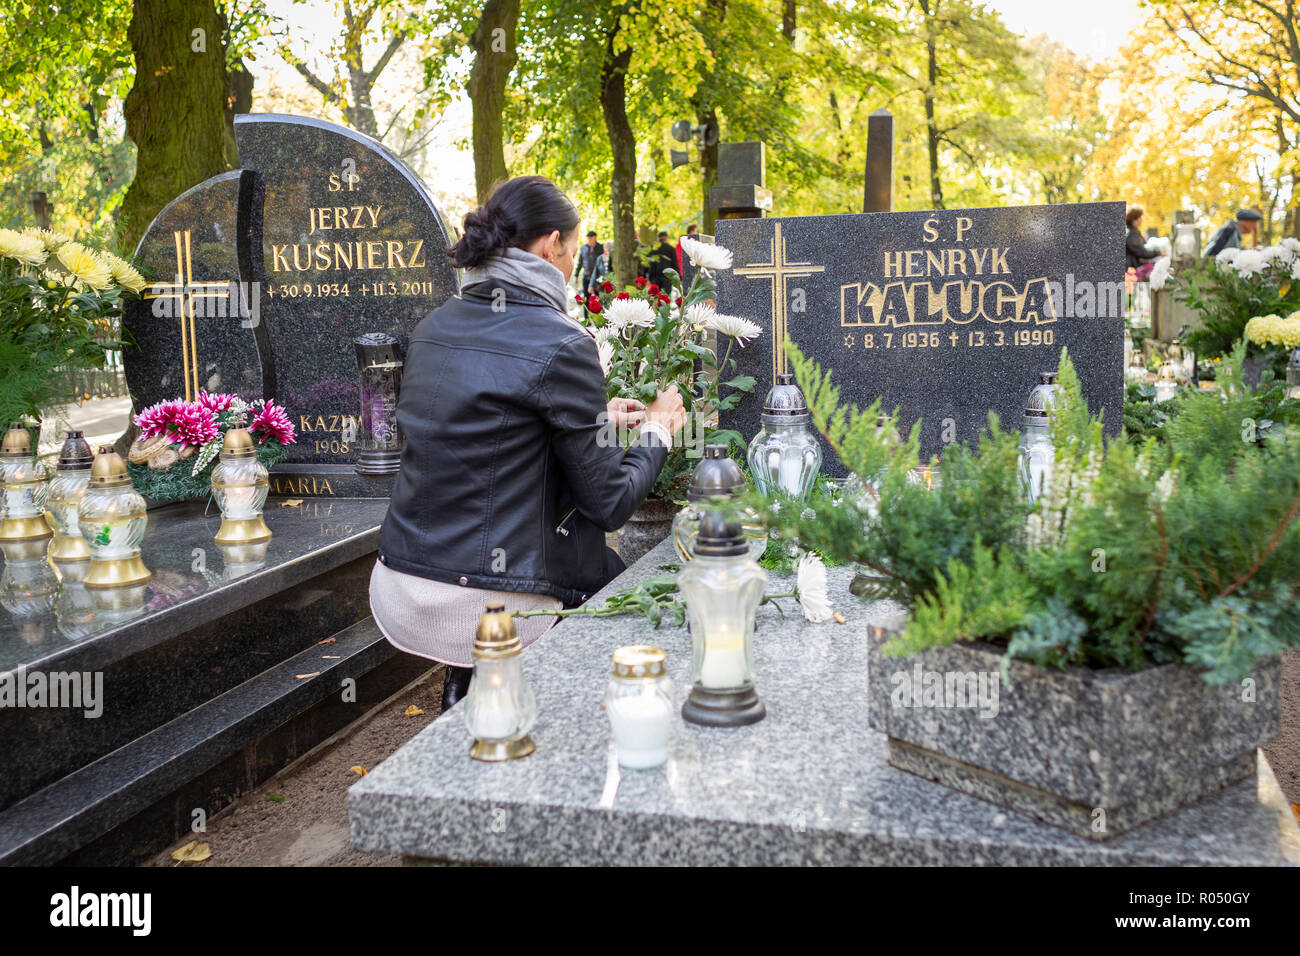 Szamotuly, Poland, 1 November 2018. All Saints Day are a festival when Christians visit cemeteries to decorate the graves of their relatives with flowers and light candles. In the Latin Churches, a solemnity in honor of all Christians who have reached the state of salvation and are in heaven, falling annually on November 1. Credit: Slawomir Kowalewski/Alamy Live News Stock Photo